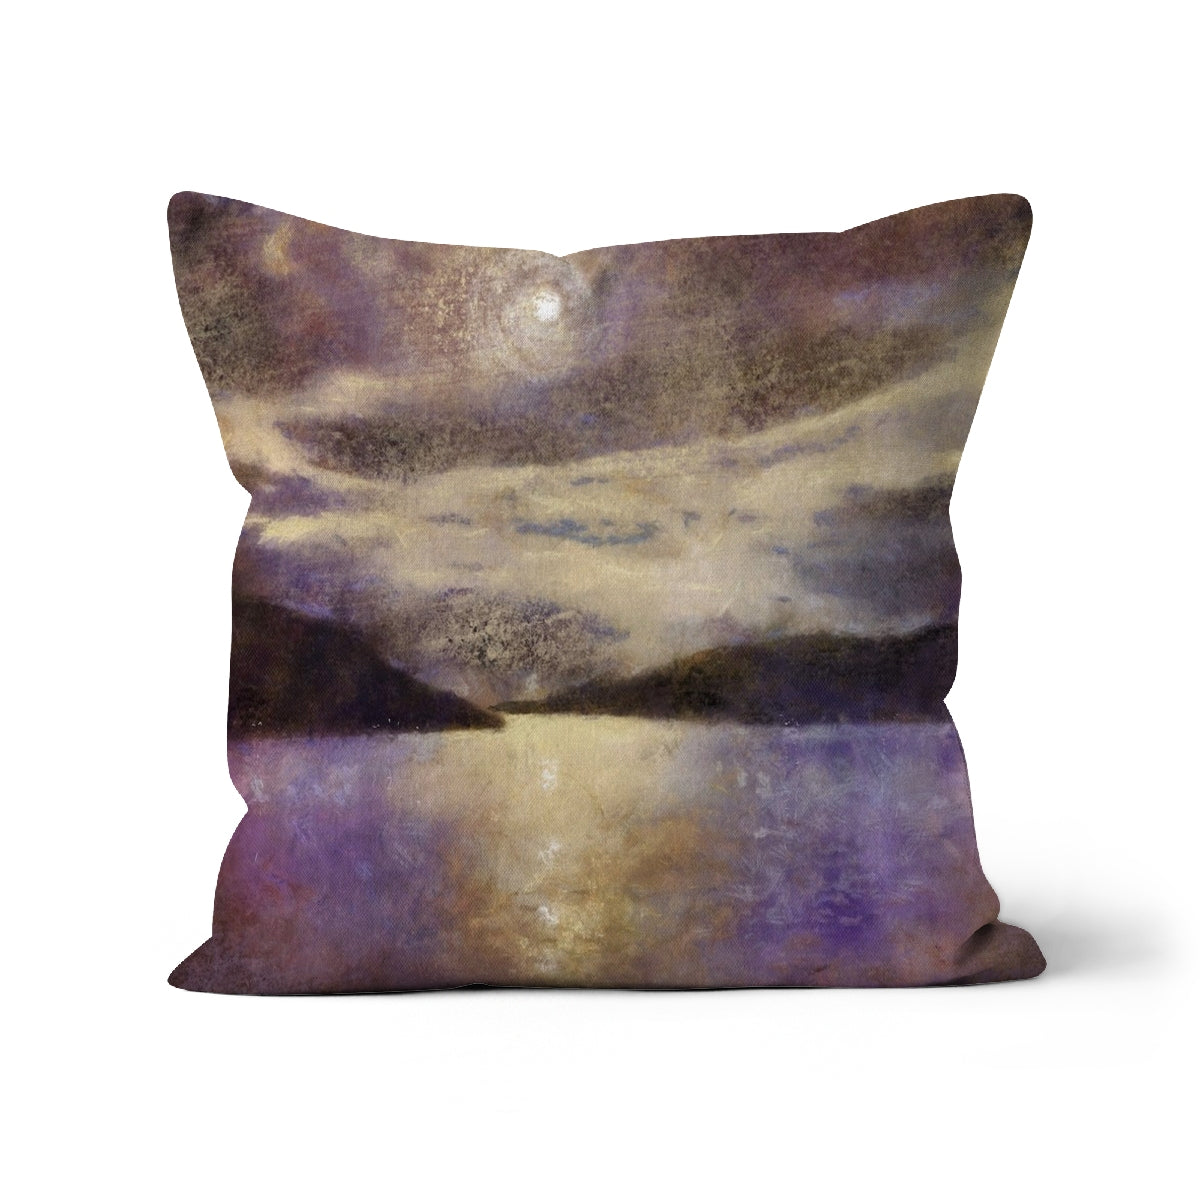 Moonlight Meets Lewis & Harris Art Gifts Cushion-Cushions-Hebridean Islands Art Gallery-Faux Suede-24"x24"-Paintings, Prints, Homeware, Art Gifts From Scotland By Scottish Artist Kevin Hunter